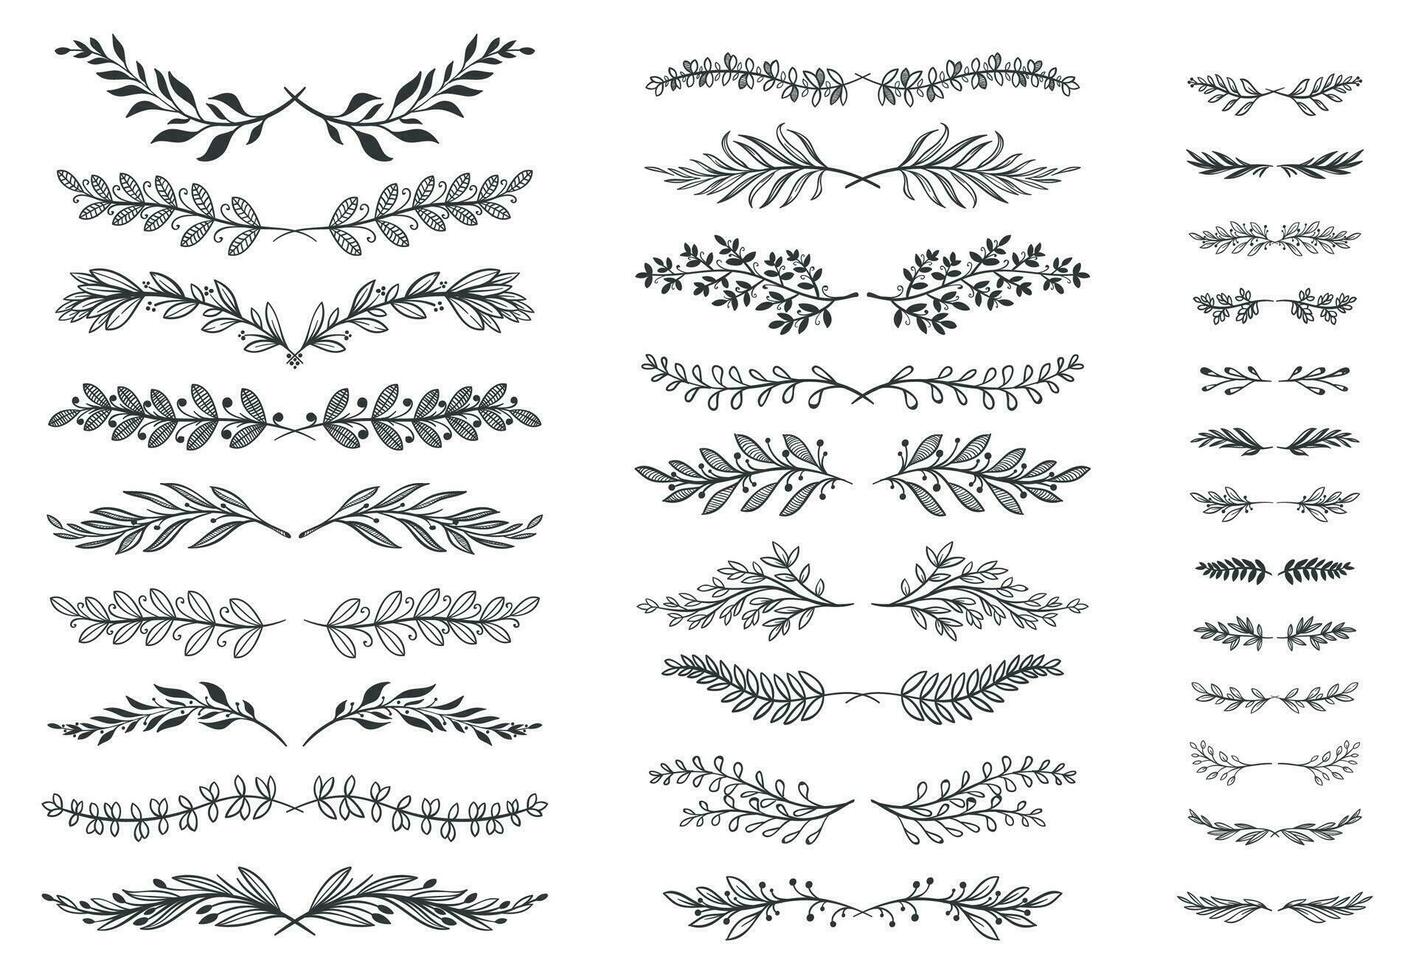 Floral ornament dividers. Ornamental leafs scroll decoration, decorative branch and hand drawn divider vector set